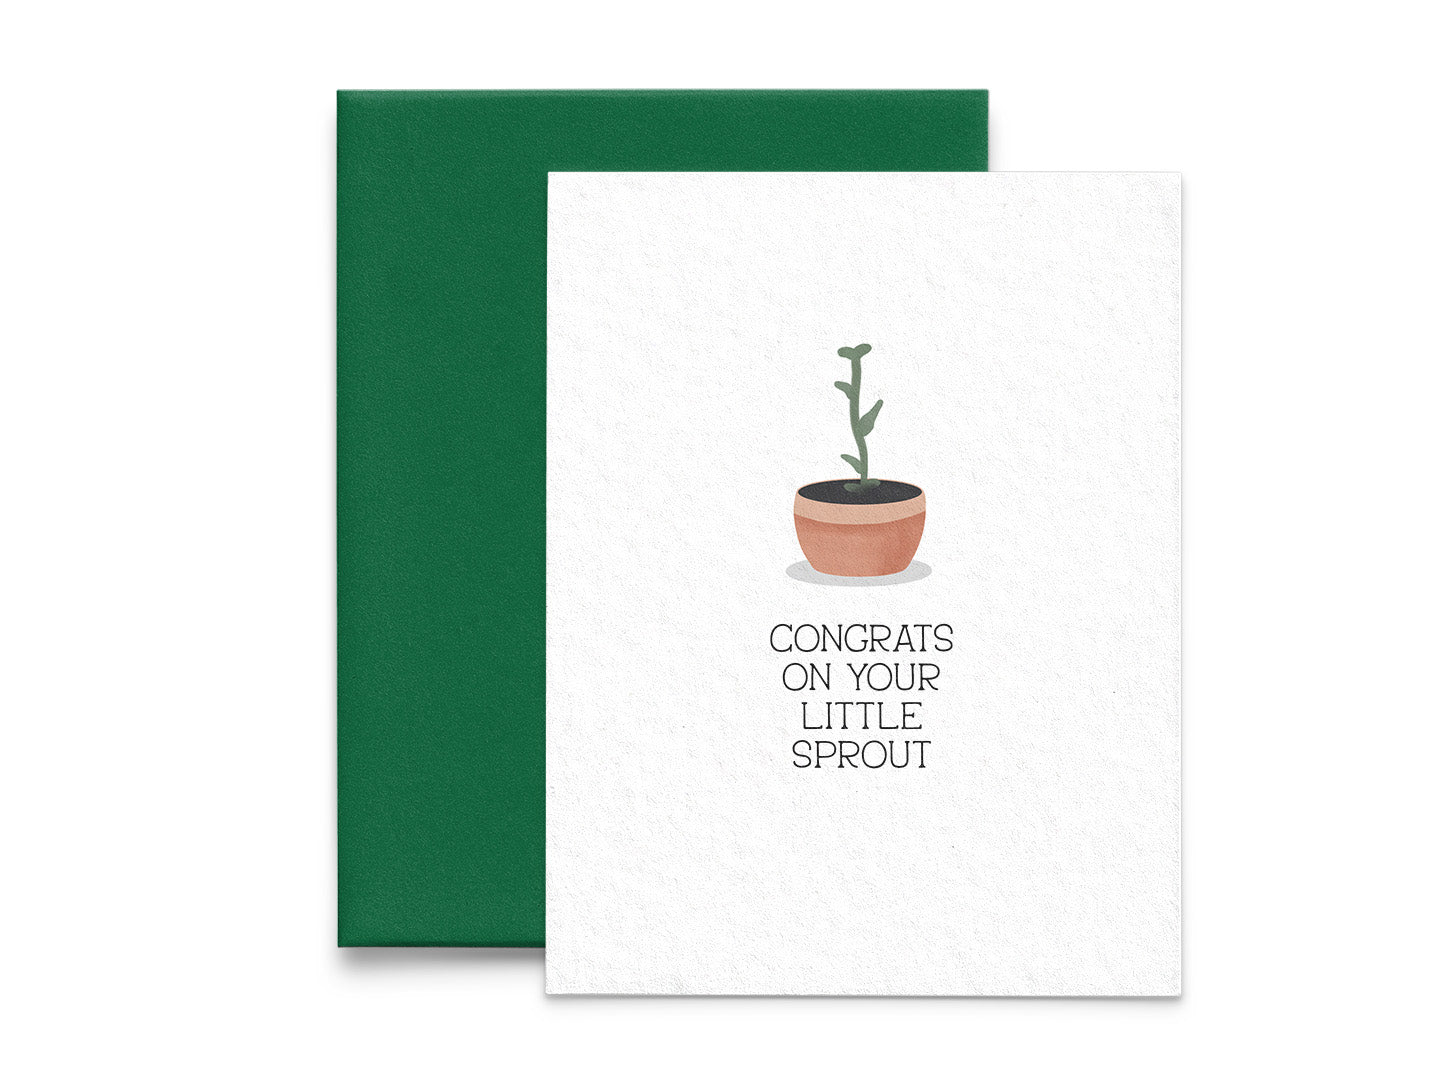 Congrats on Your Little Sprout New Baby Card